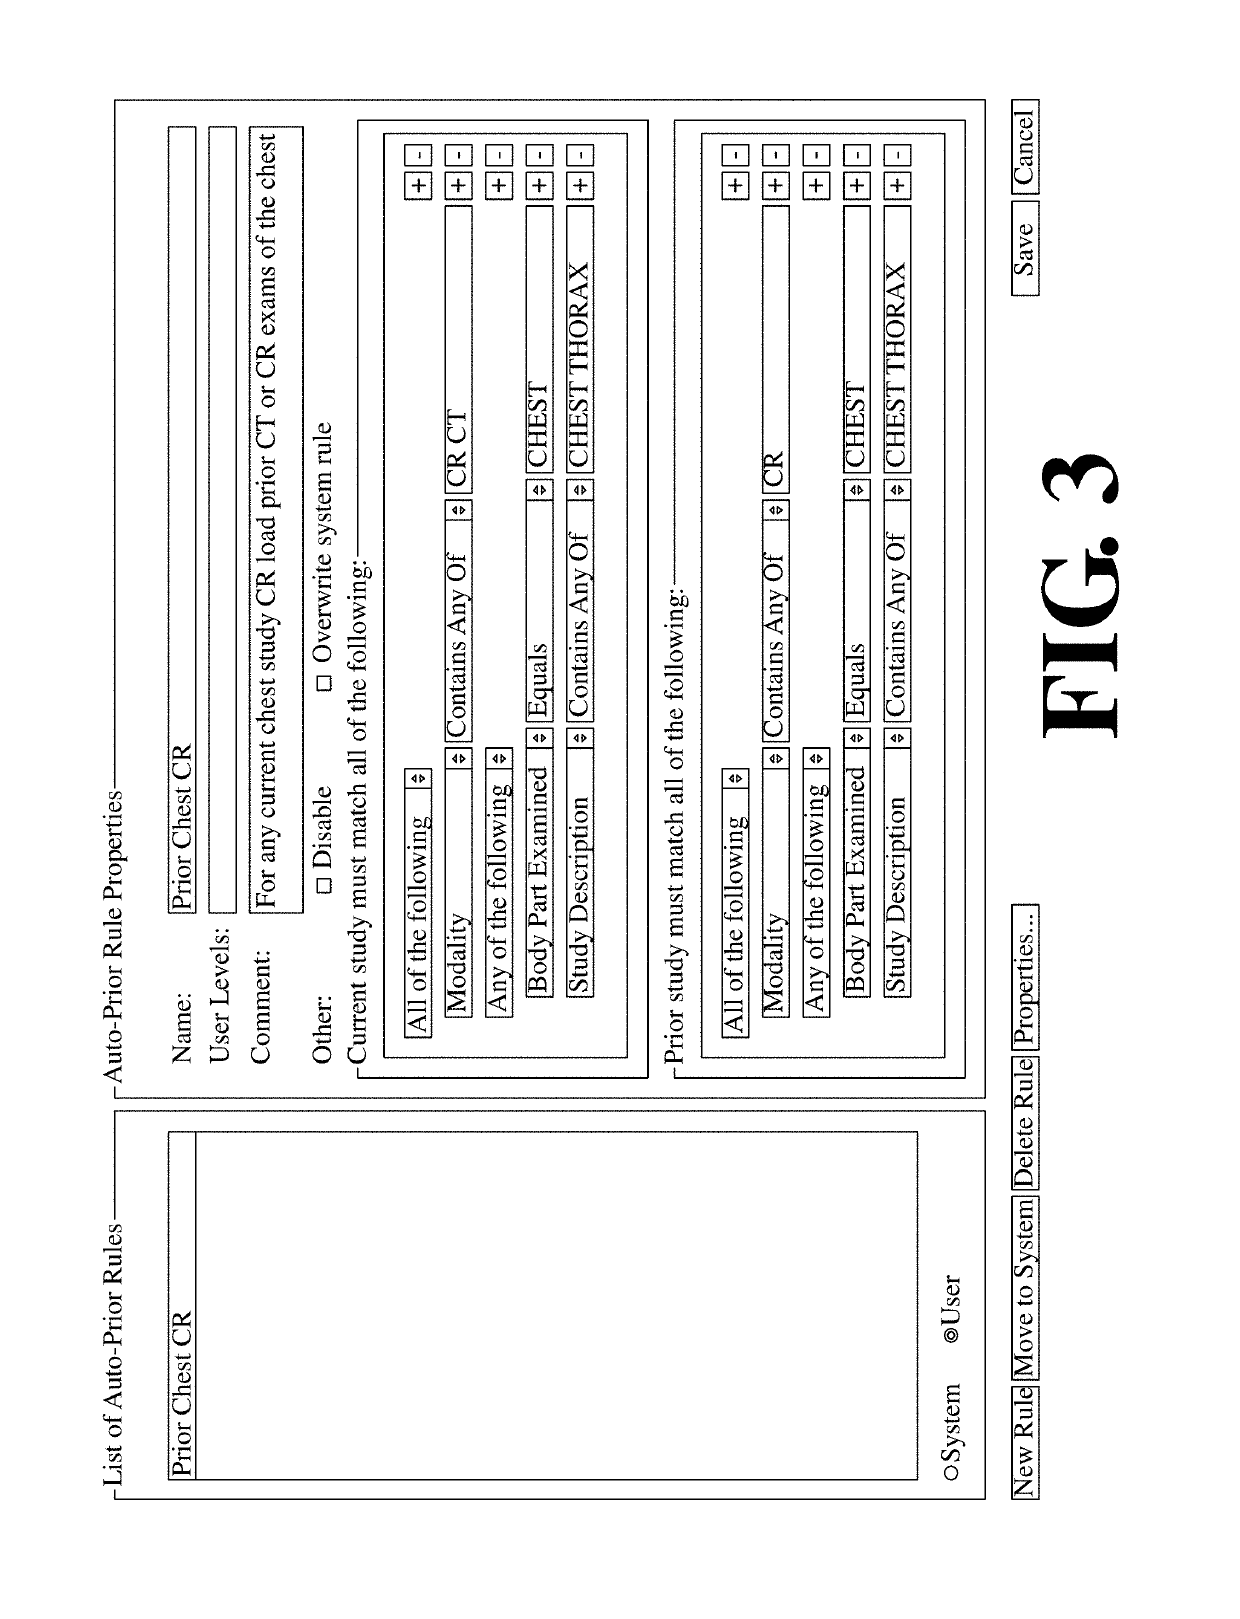 Method and system for rule-based display of sets of images